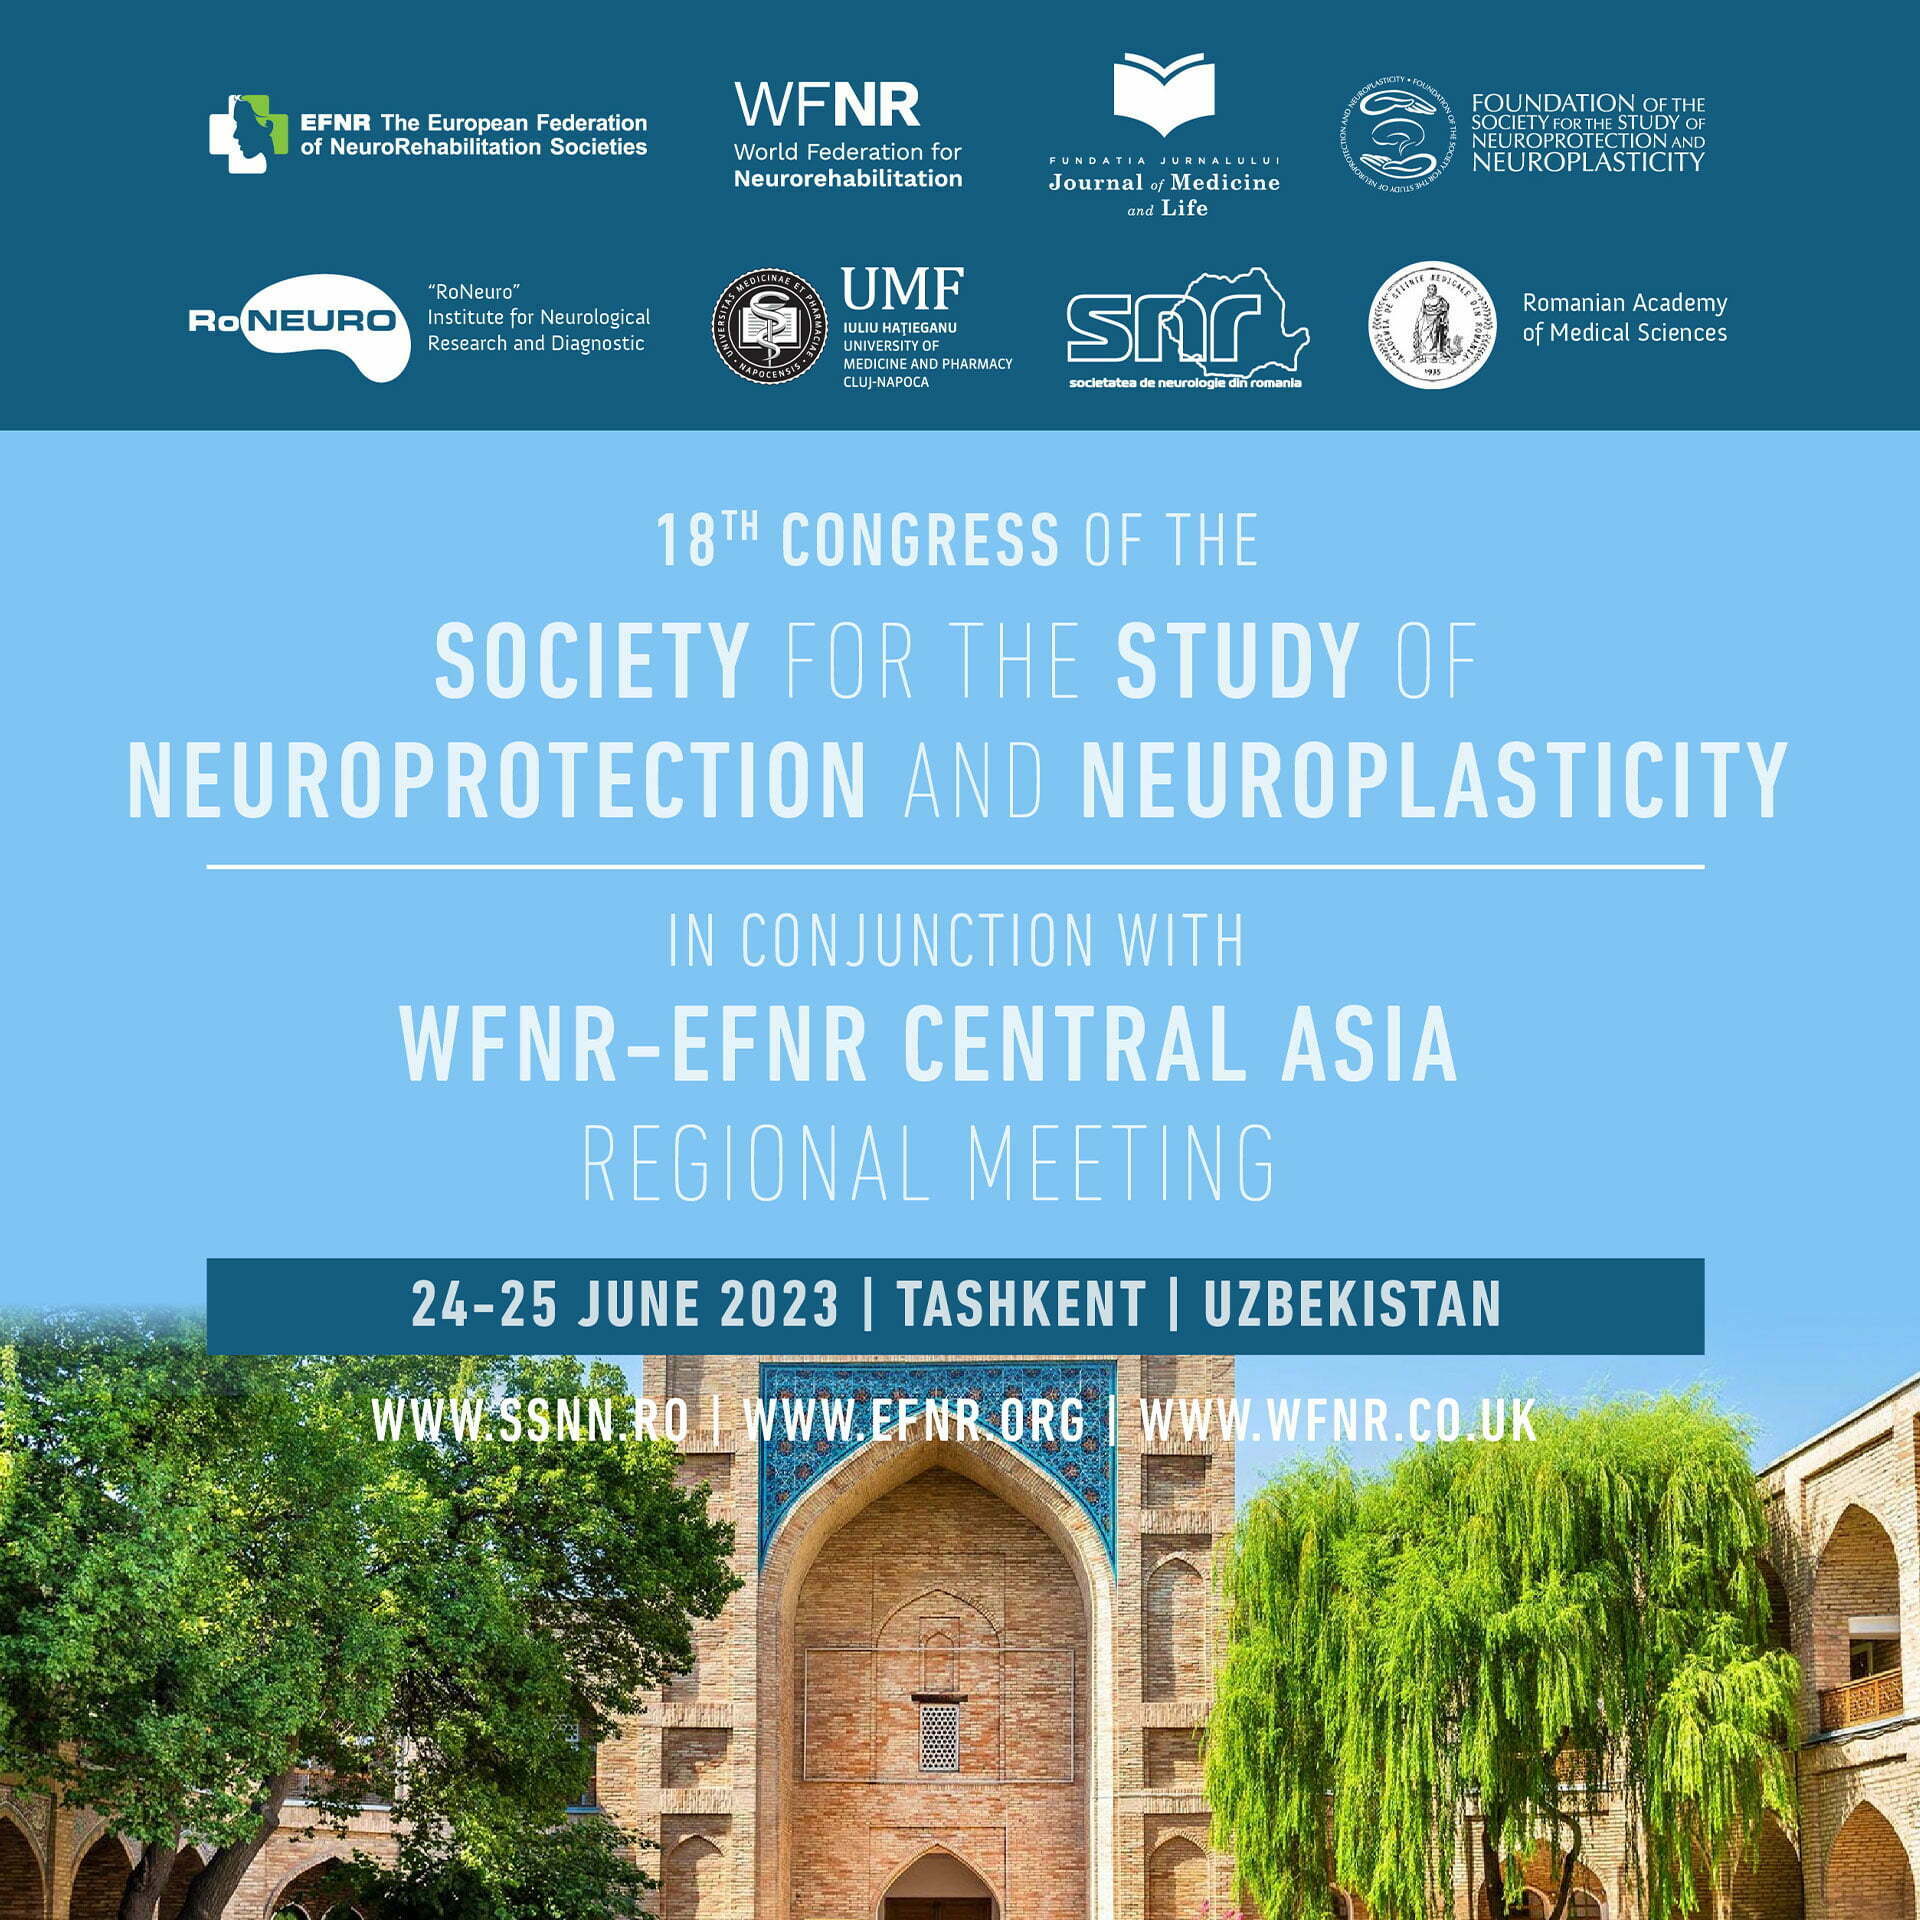 18th CONGRESS OF THE SOCIETY FOR THE STUDY OF NEUROPROTECTION AND NEUROPLASTICITY